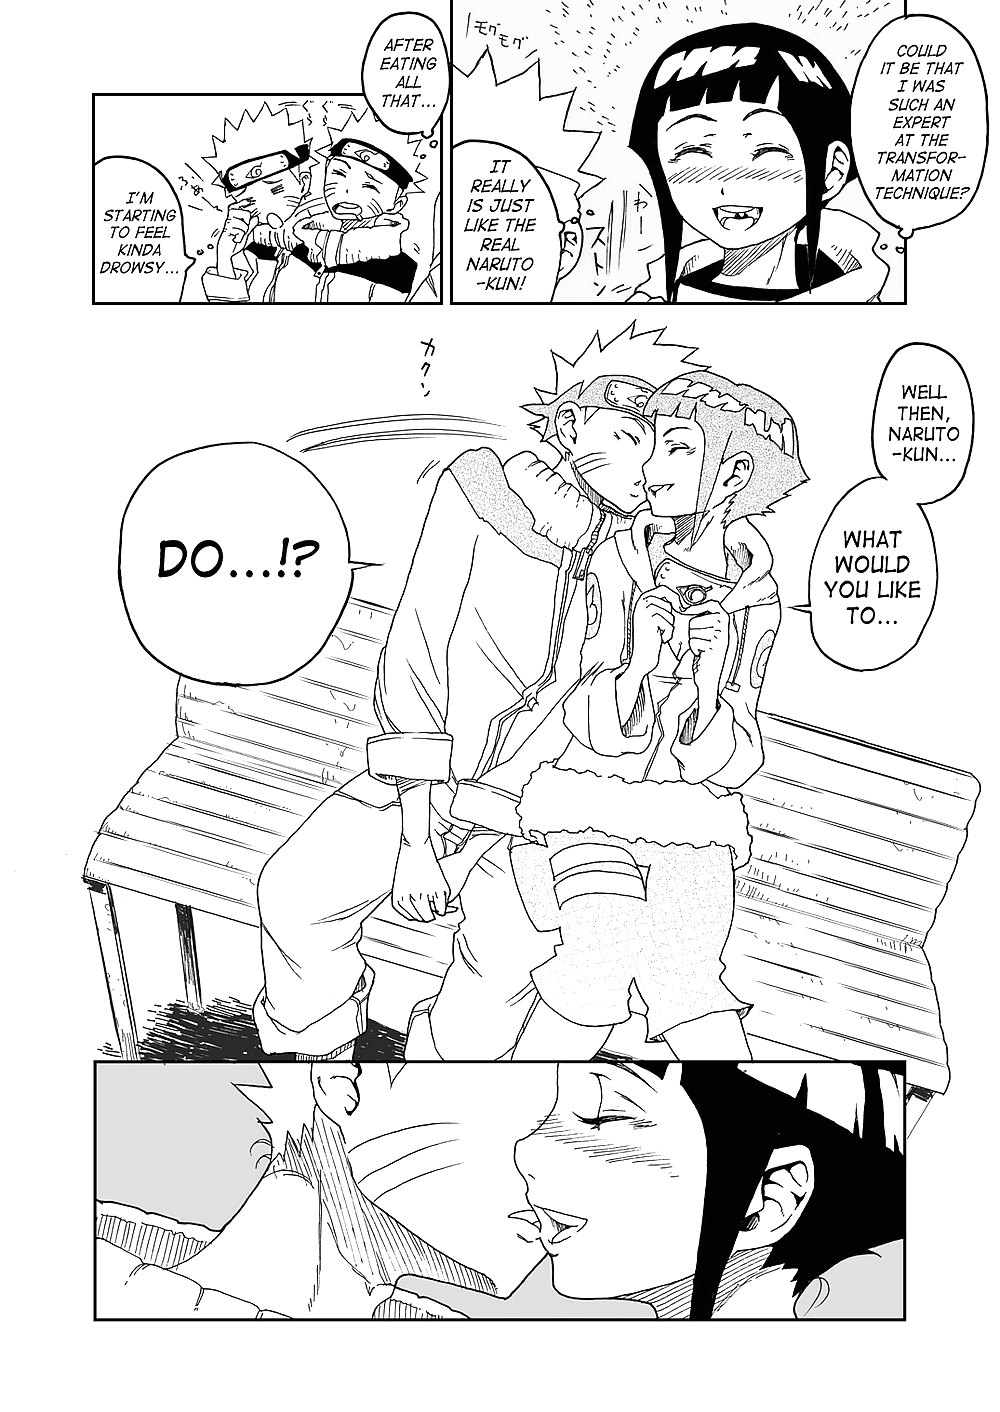 Naruto Doujin - I Only Look At You #11712973